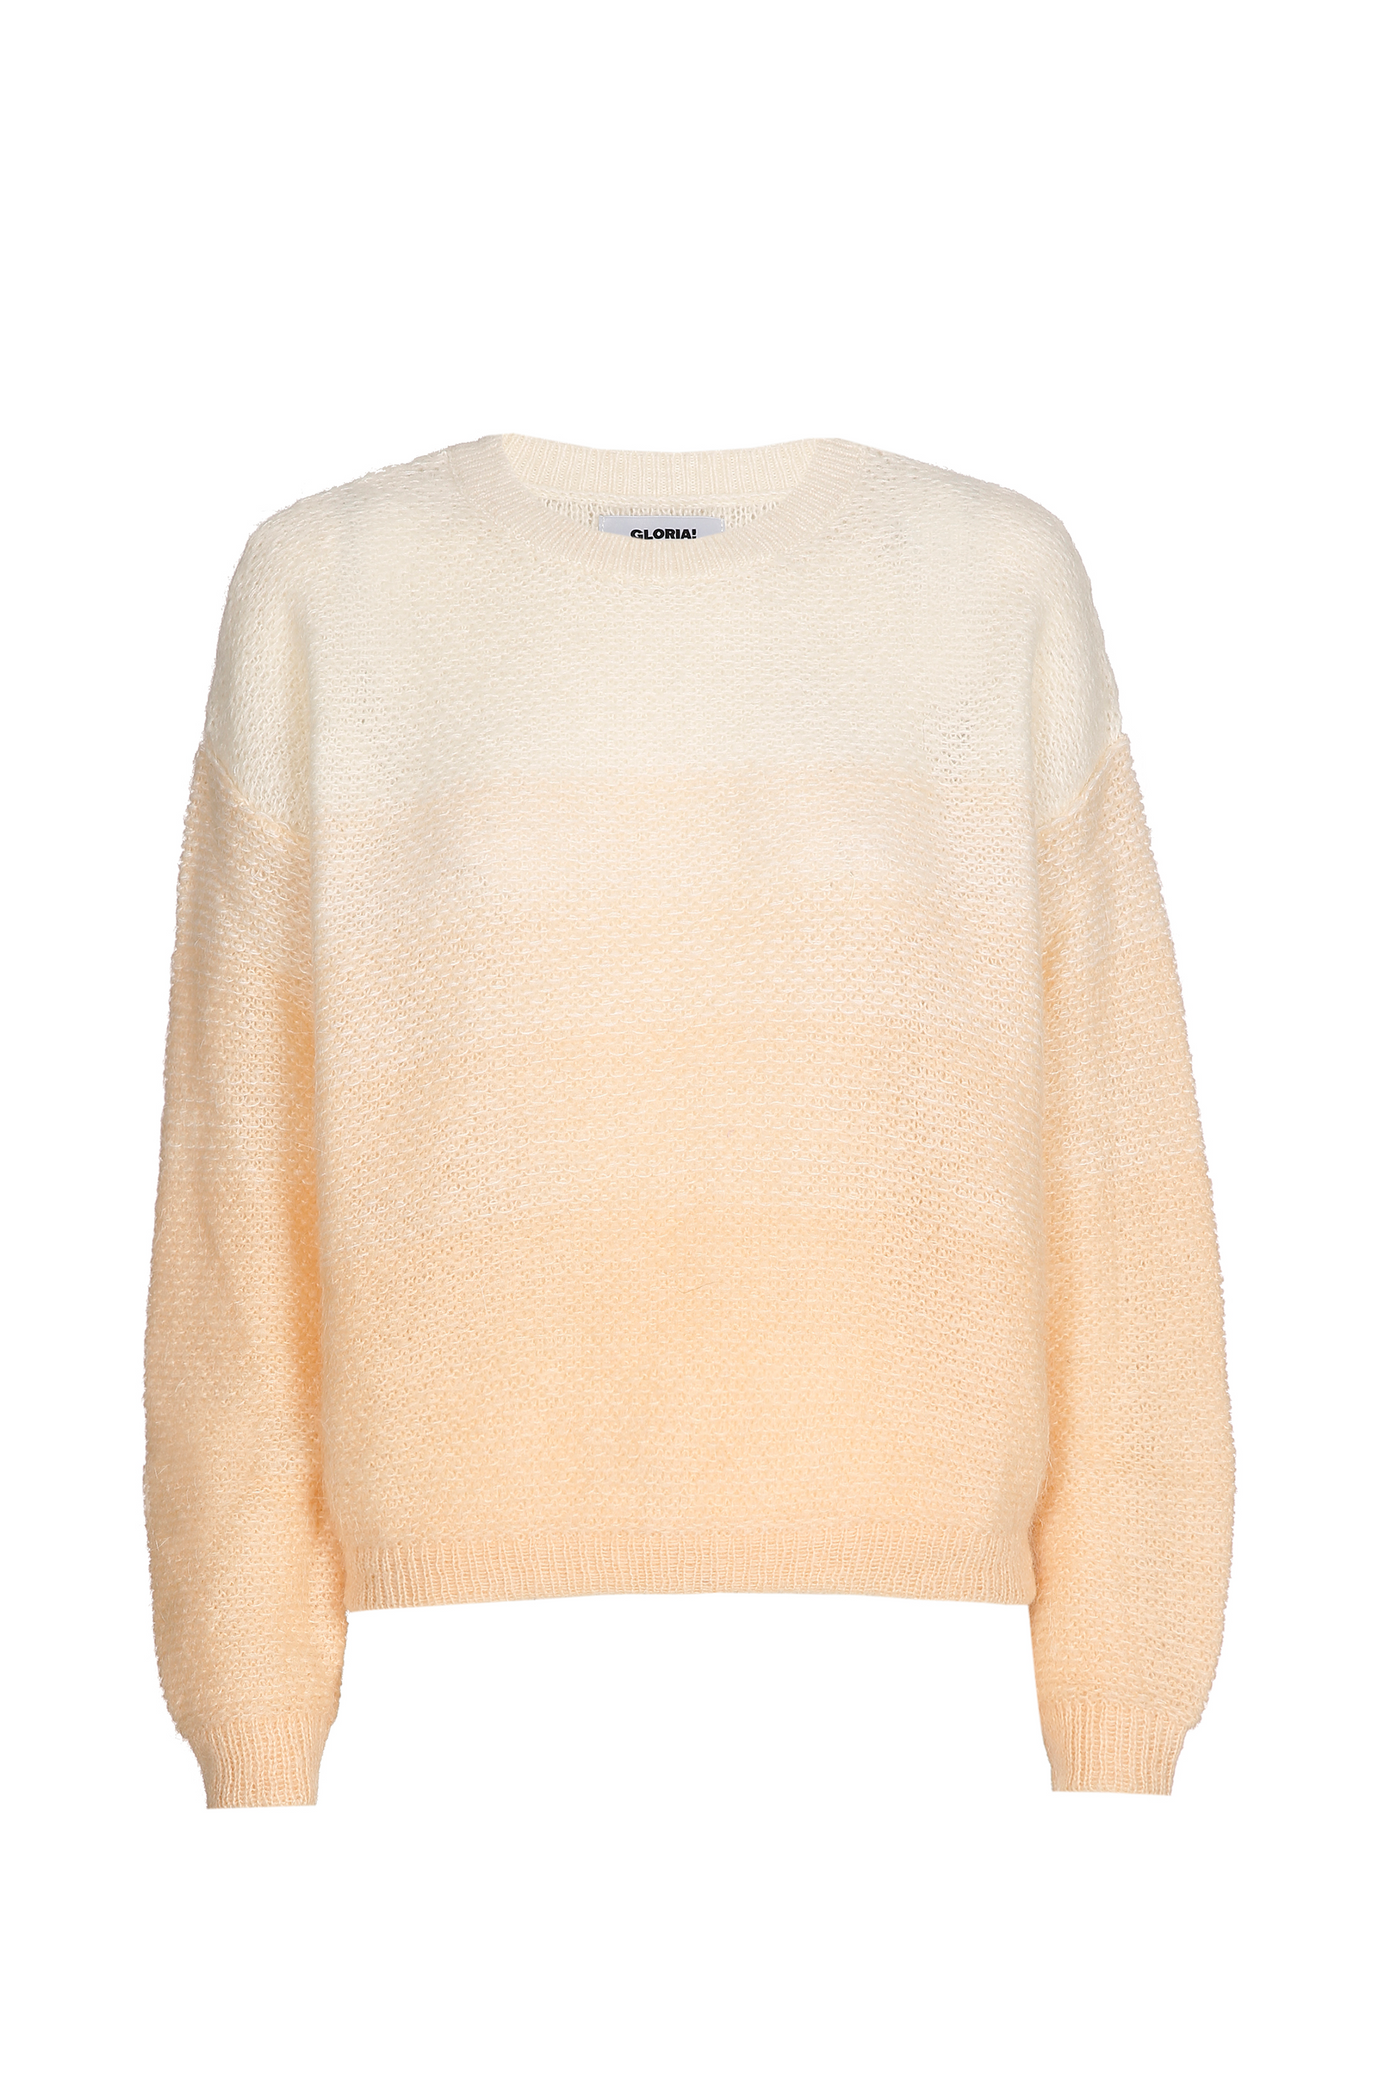 Dreamy Carry Over Sweater Dreamy Off White / Sand